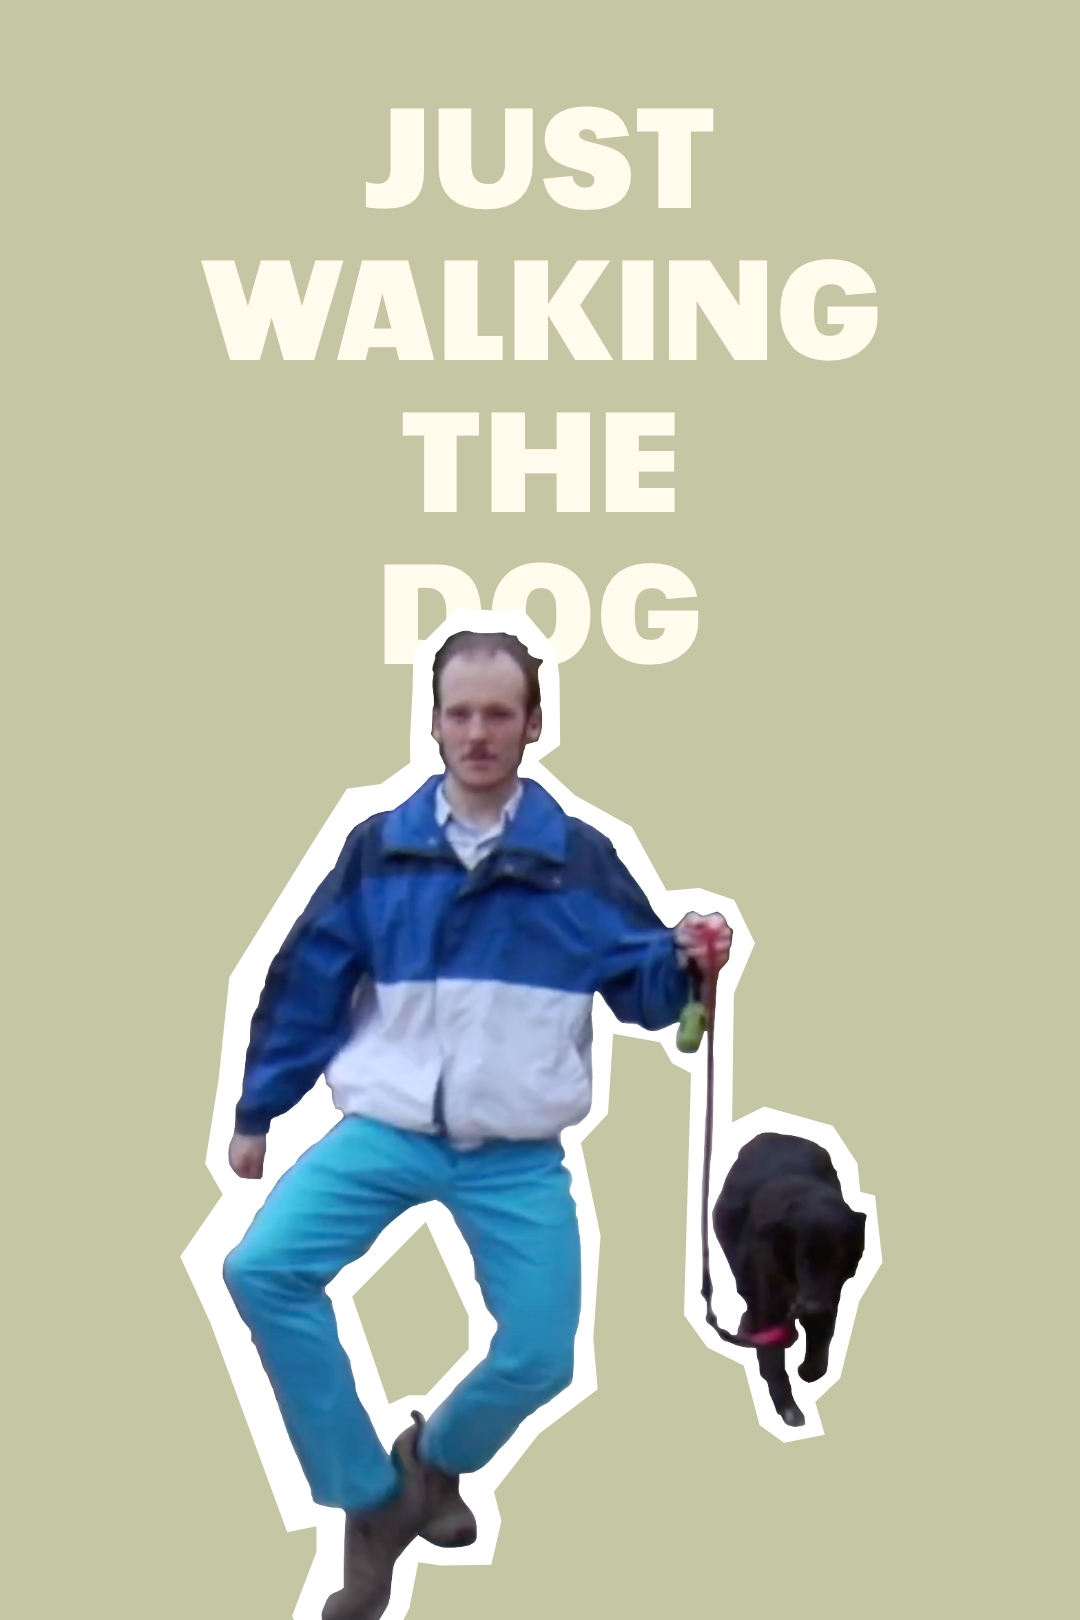 Poster for the film "Just Walking the Dog"